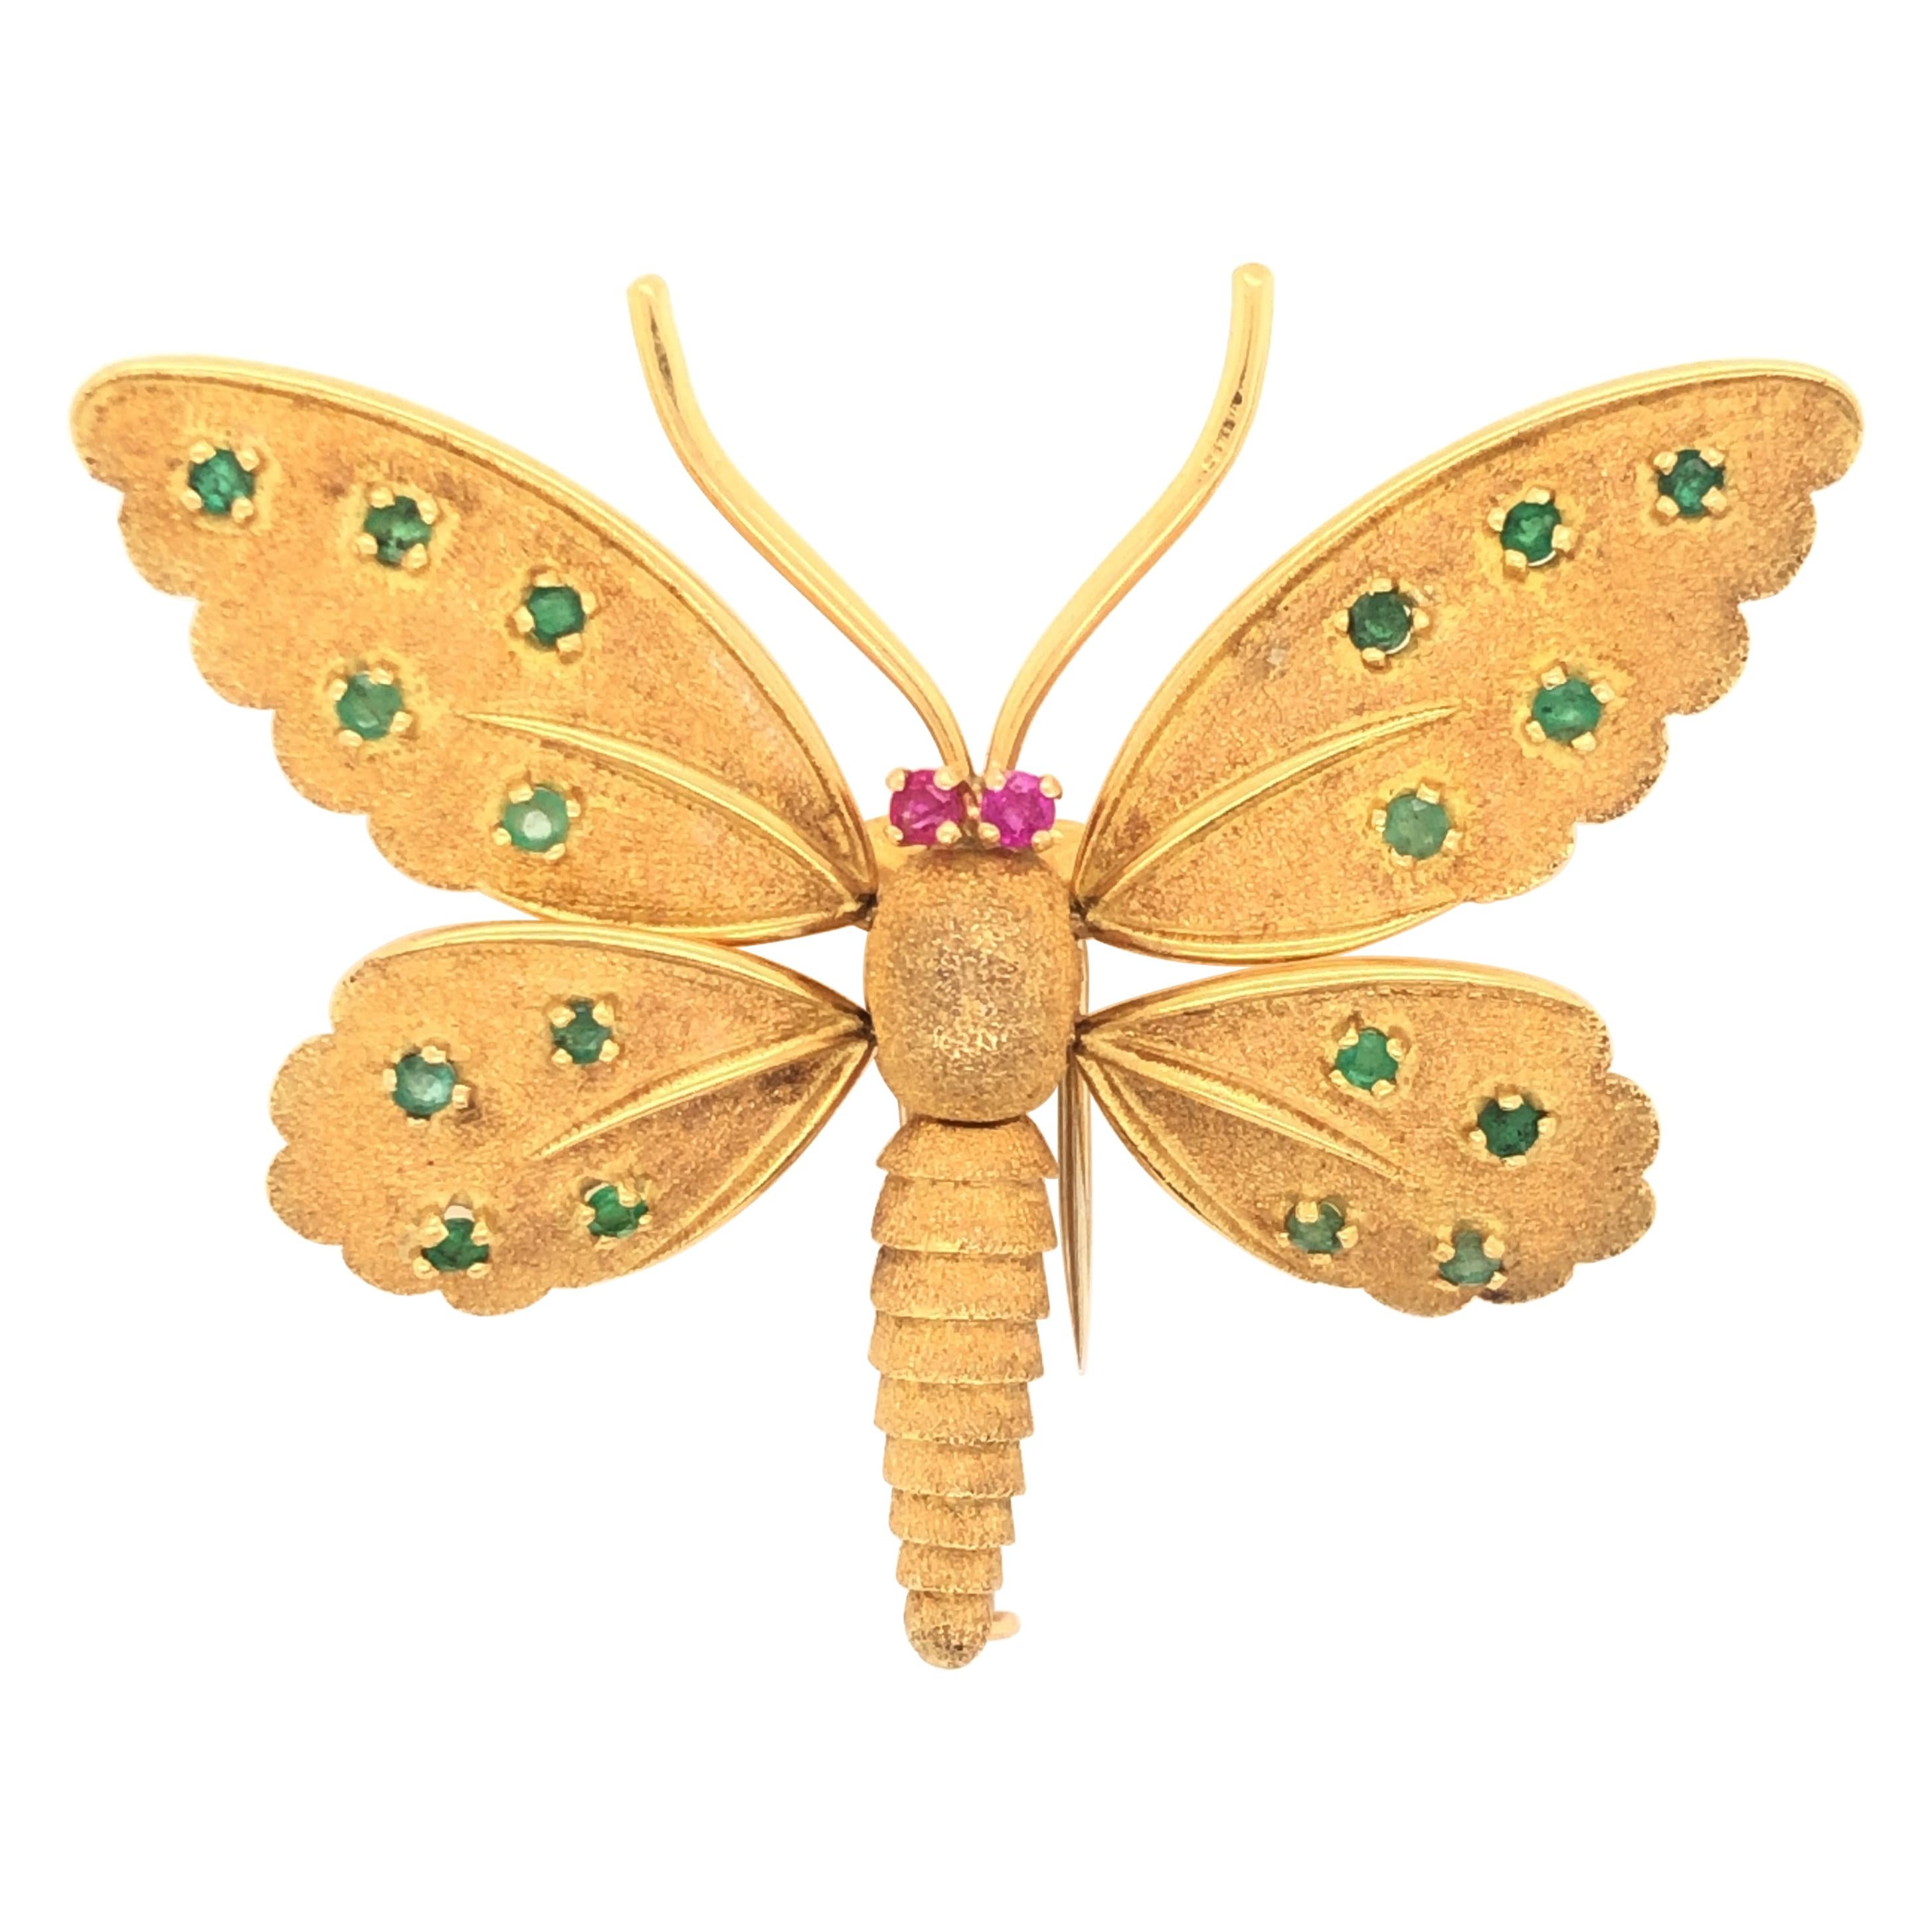 Fred Paris 18k Emerald & Ruby Articulated Butterfly Brooch